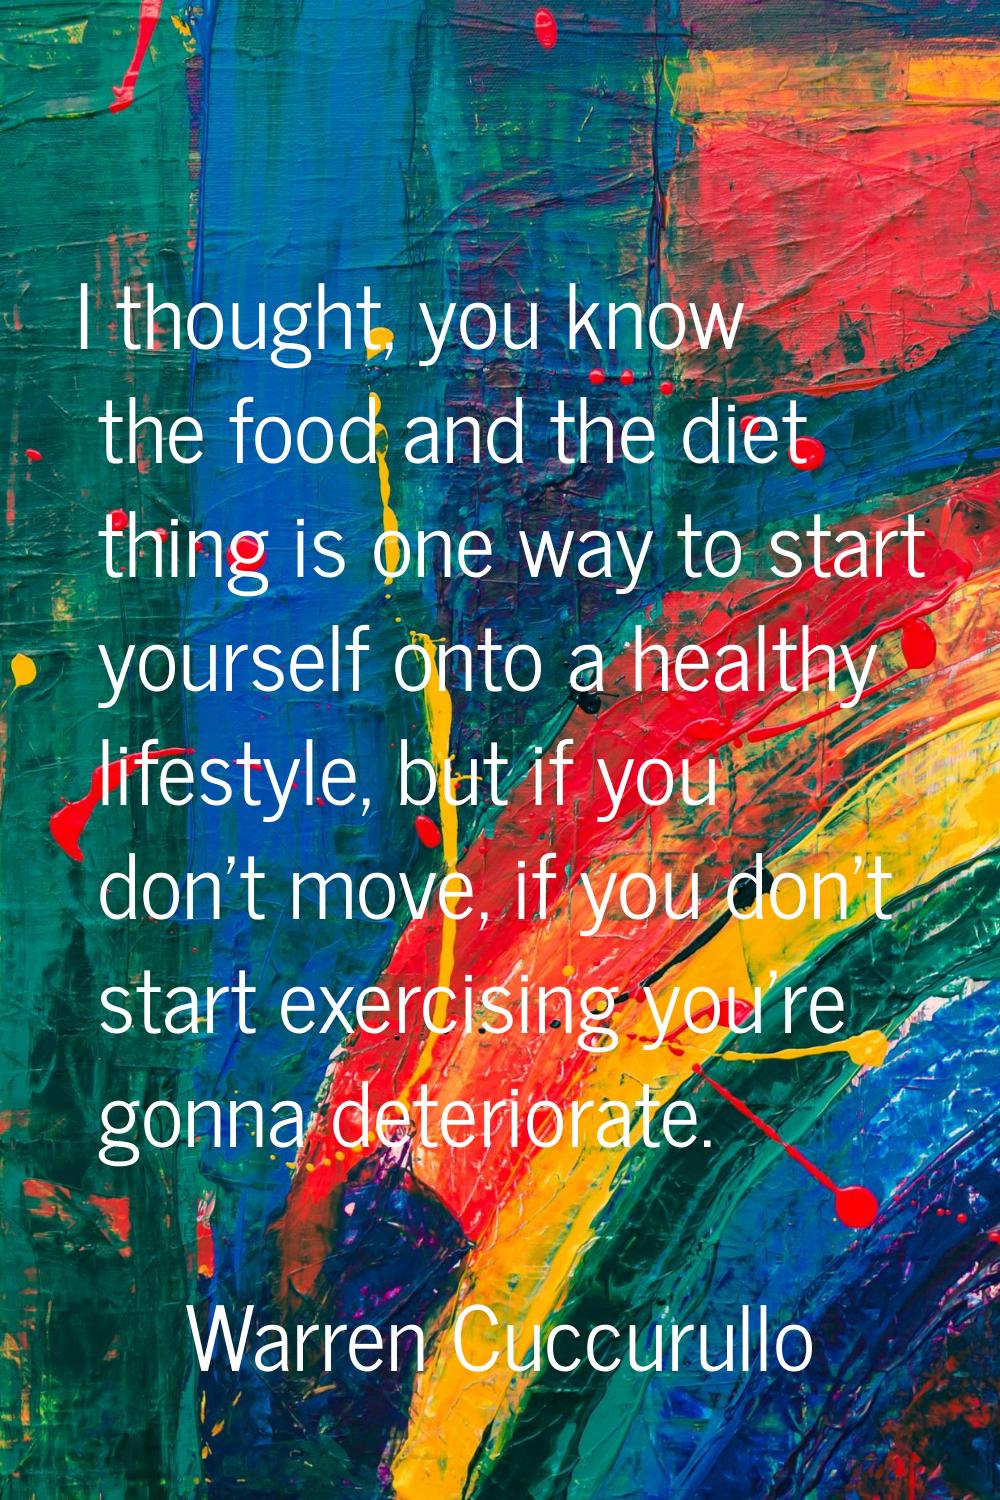 I thought, you know the food and the diet thing is one way to start yourself onto a healthy lifesty